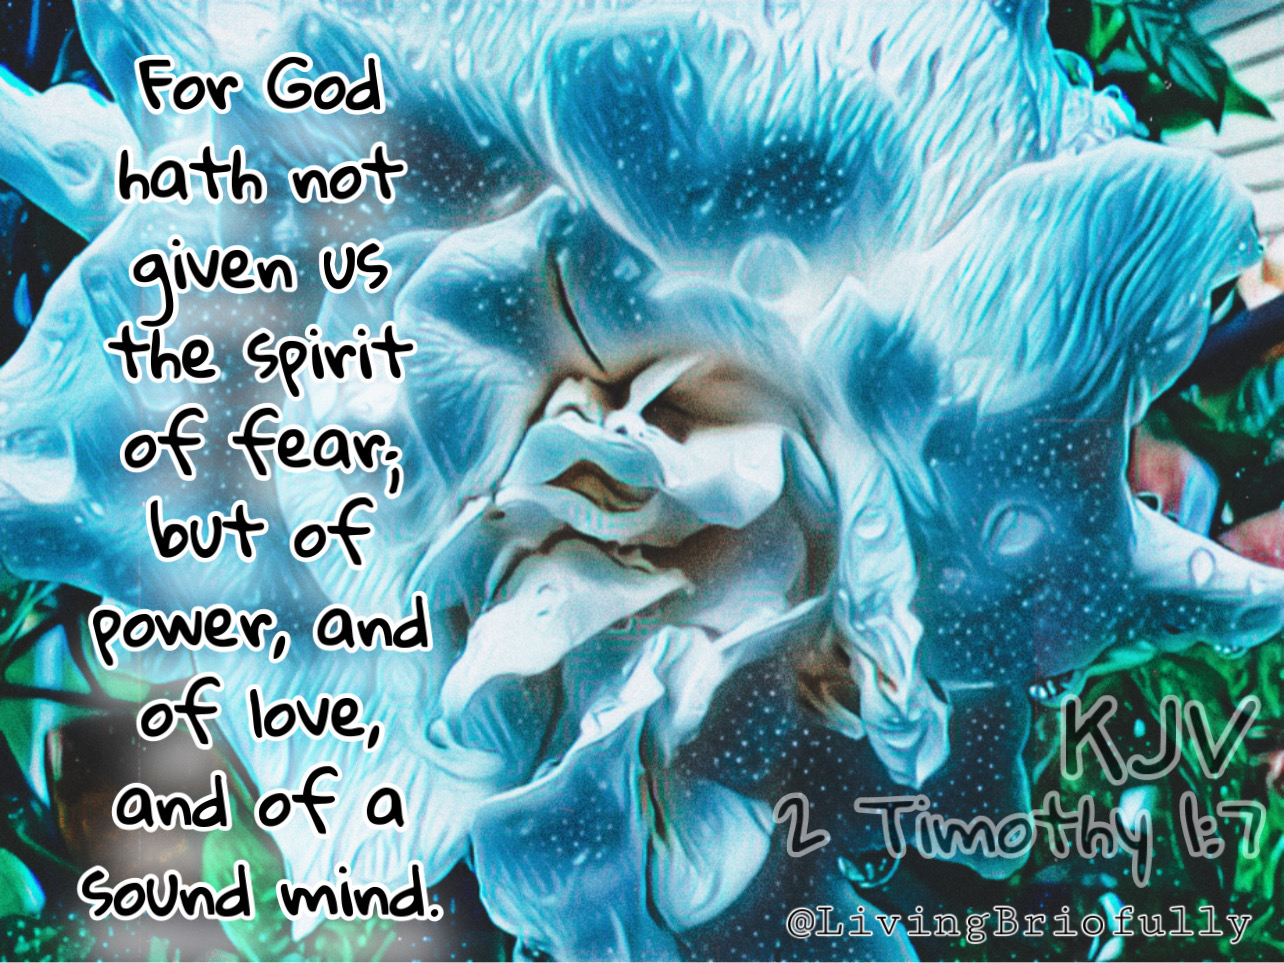 "For God hath not given us the spirit of fear; but of power, and of love, and of a sound mind." 2 Timothy 1:7 KJV